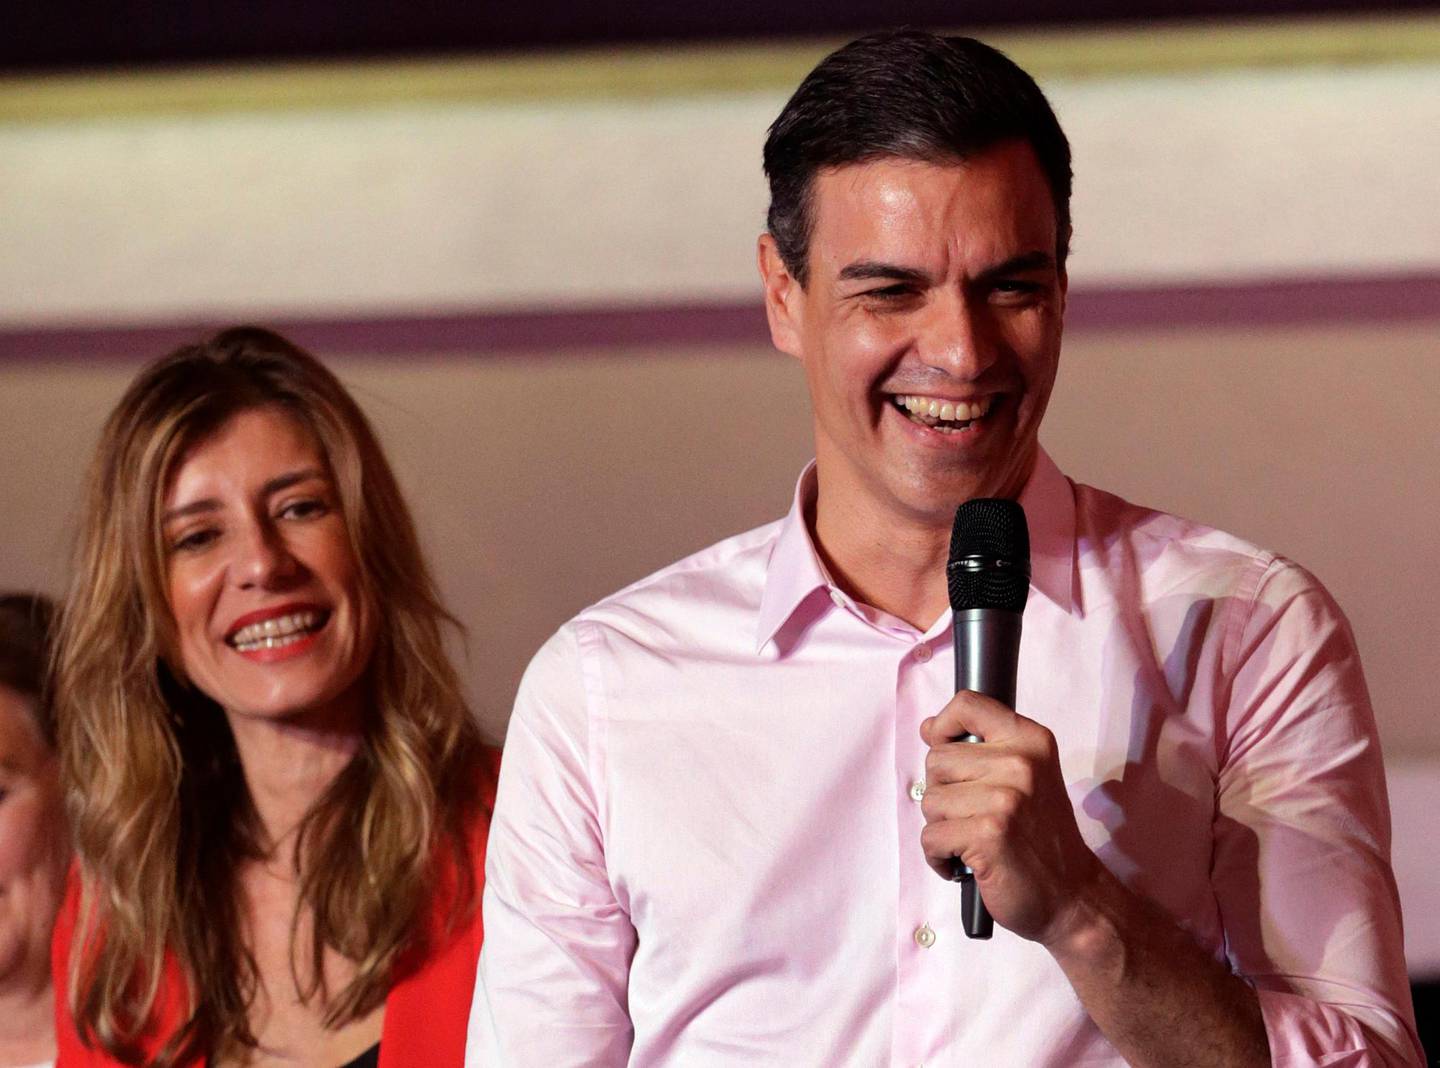 Spanish Prime Minister and Socialist Party candidate Pedro Sanchez speaks to supporters gathered at the party headquarters waiting for results of the general election in Madrid, Sunday, April 28, 2019. Spain's governing Socialists won the country's national election Sunday but will need the backing of smaller parties to stay in power, while a far-right party rode a groundswell of support to enter the lower house of parliament for the first time in four decades, provisional results showed. At left is his wife Maria Begona Gomez. (AP Photo/Andrea Comas)